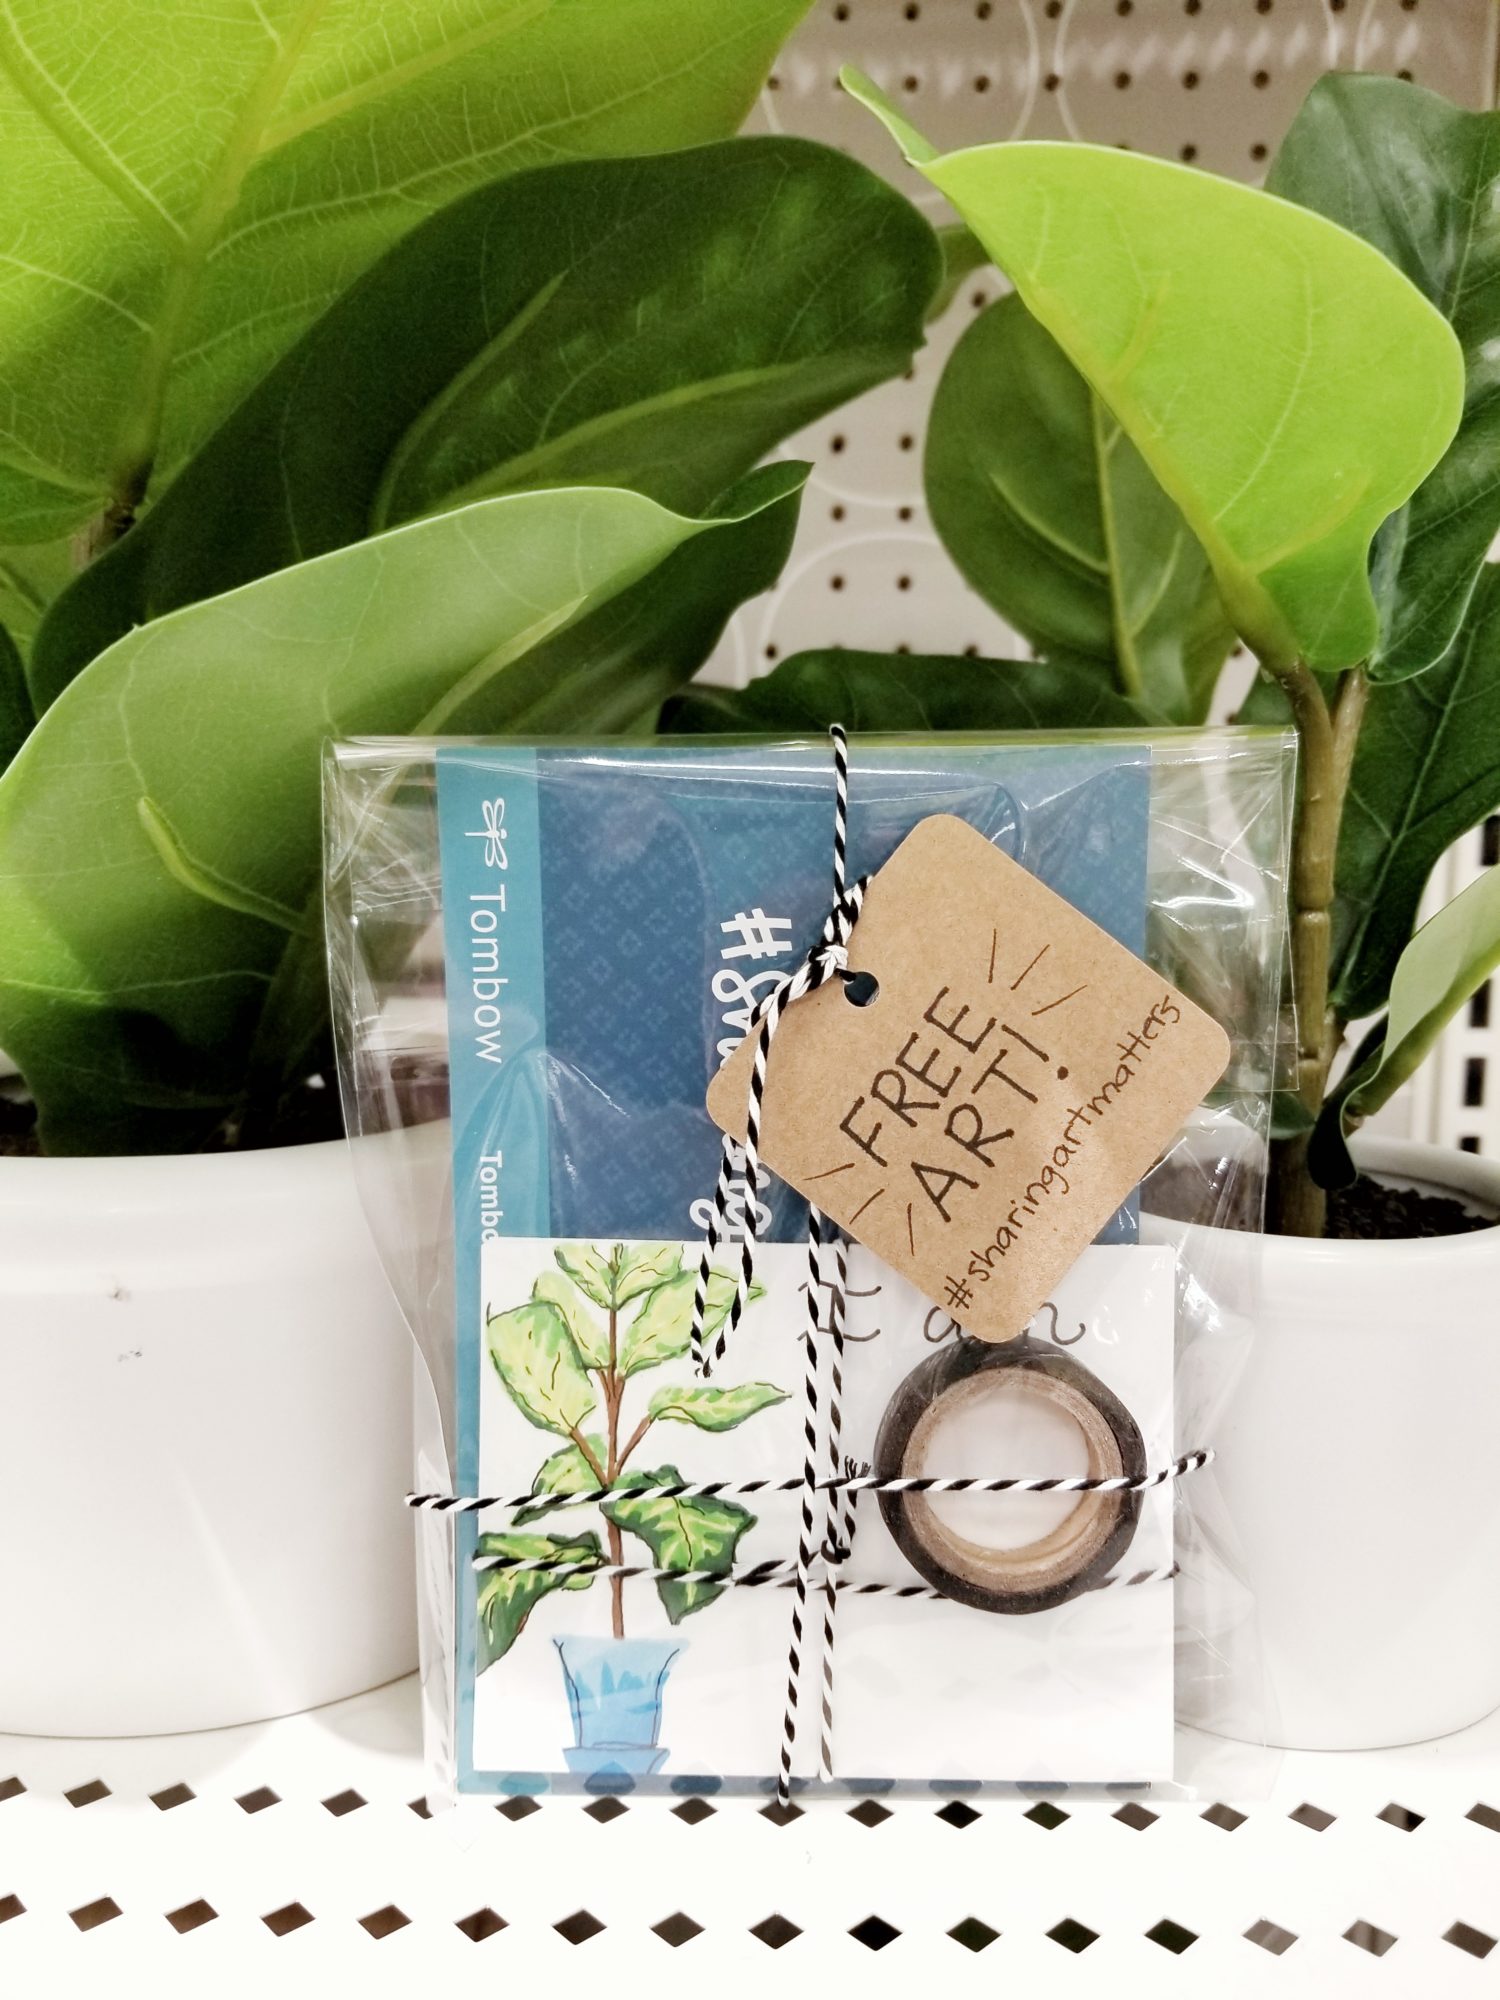 Create mirror affirmation cards for #sharingartmatters with @graceannestudio! @tombowusa #tombowusa